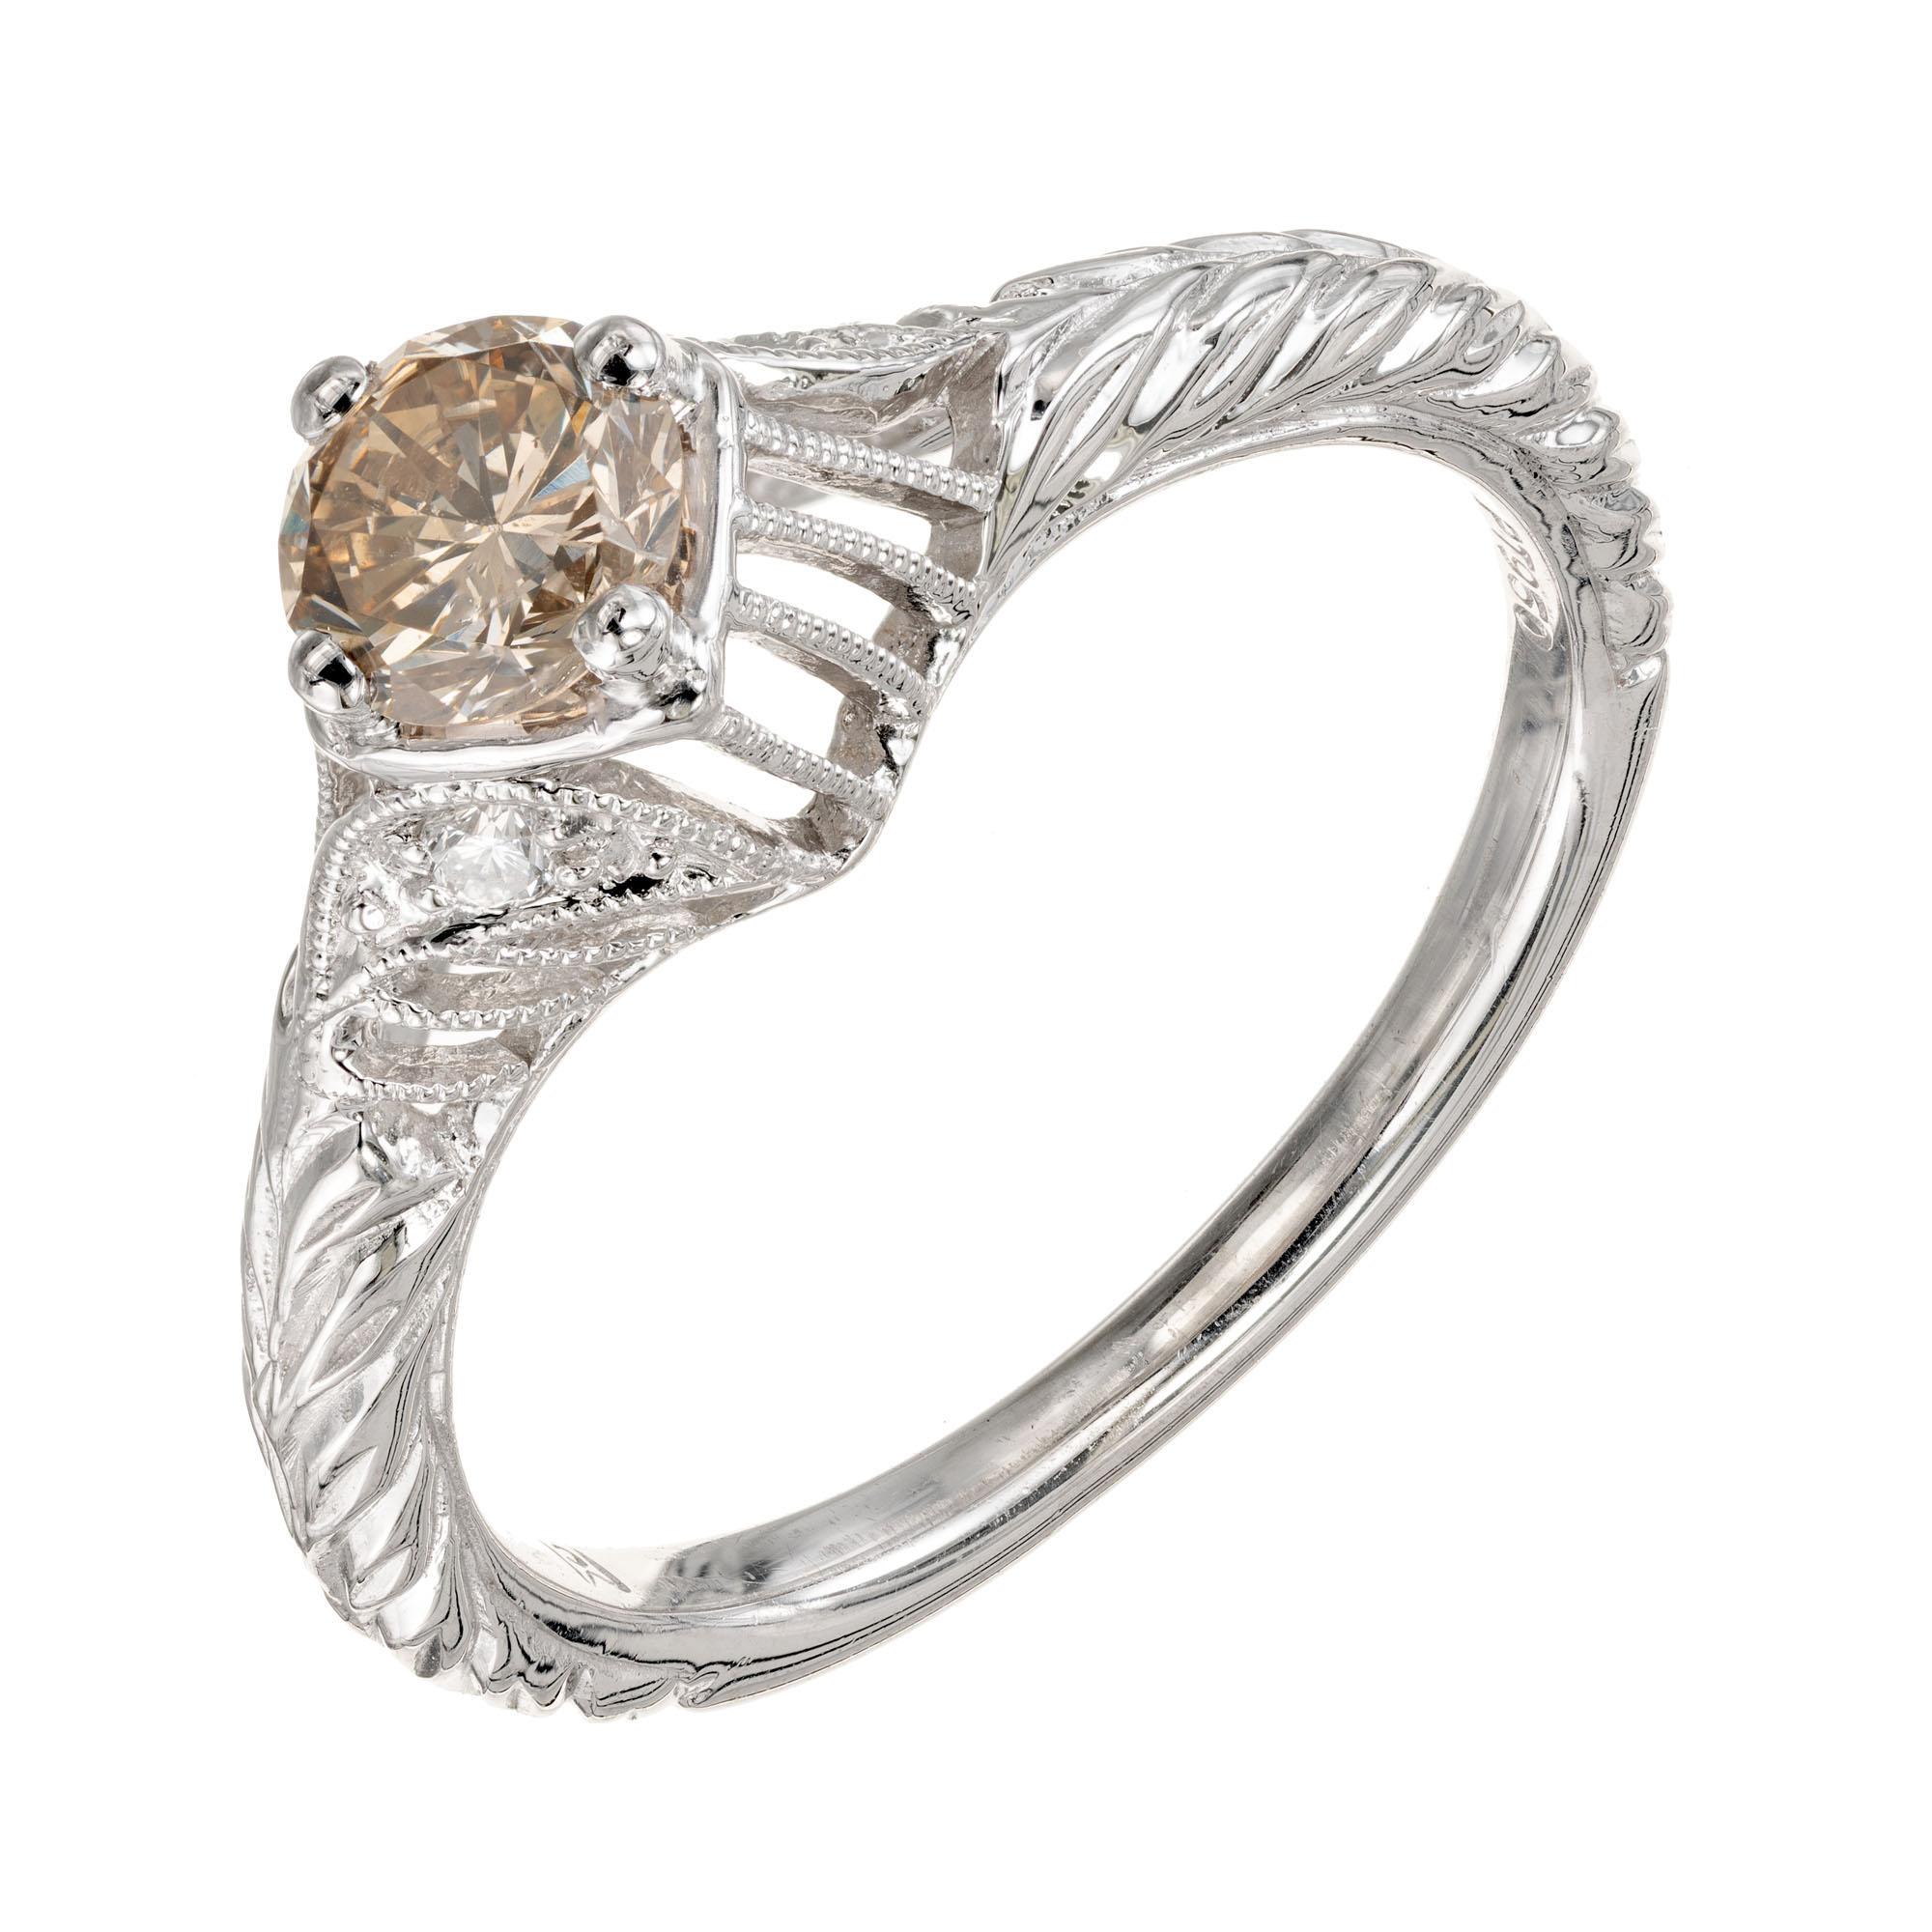 Transitional cut GIA certified natural light brown diamond. Vintage inspired platinum open work setting with round diamond accents. 

1 round brilliant cut light brown diamond, approx. .54cts W I  GIA Certificate # 2155386146
2 round diamonds,